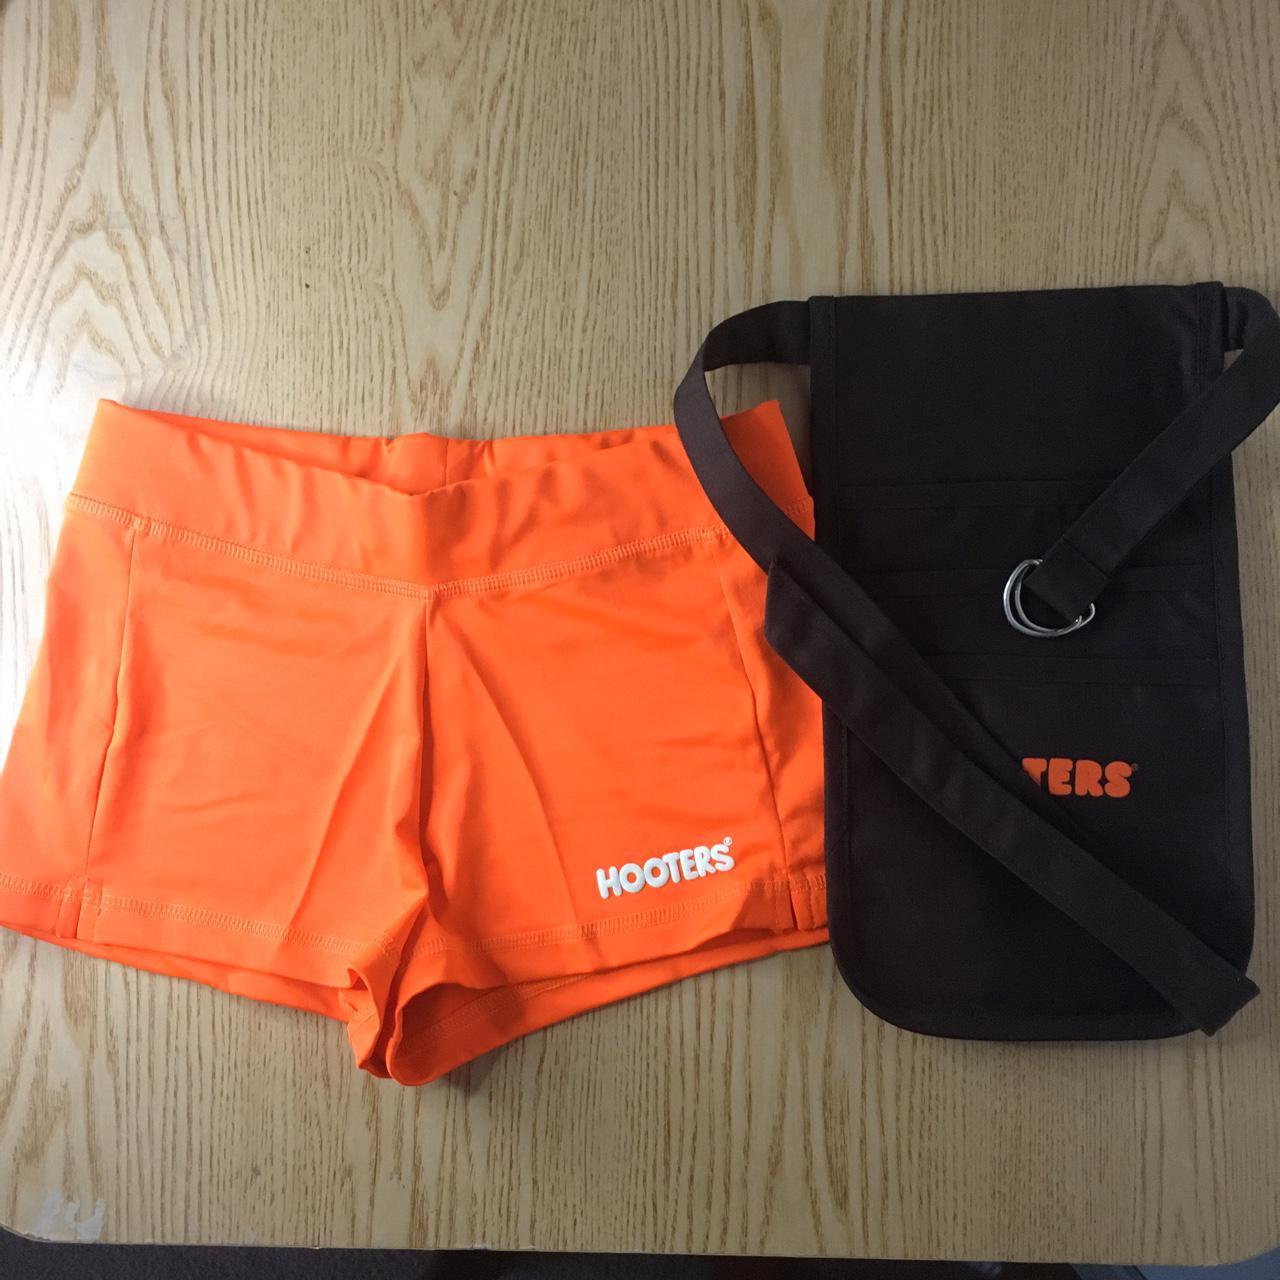 New Hooters Girl Uniform Shorts and Money Pouch - Depop